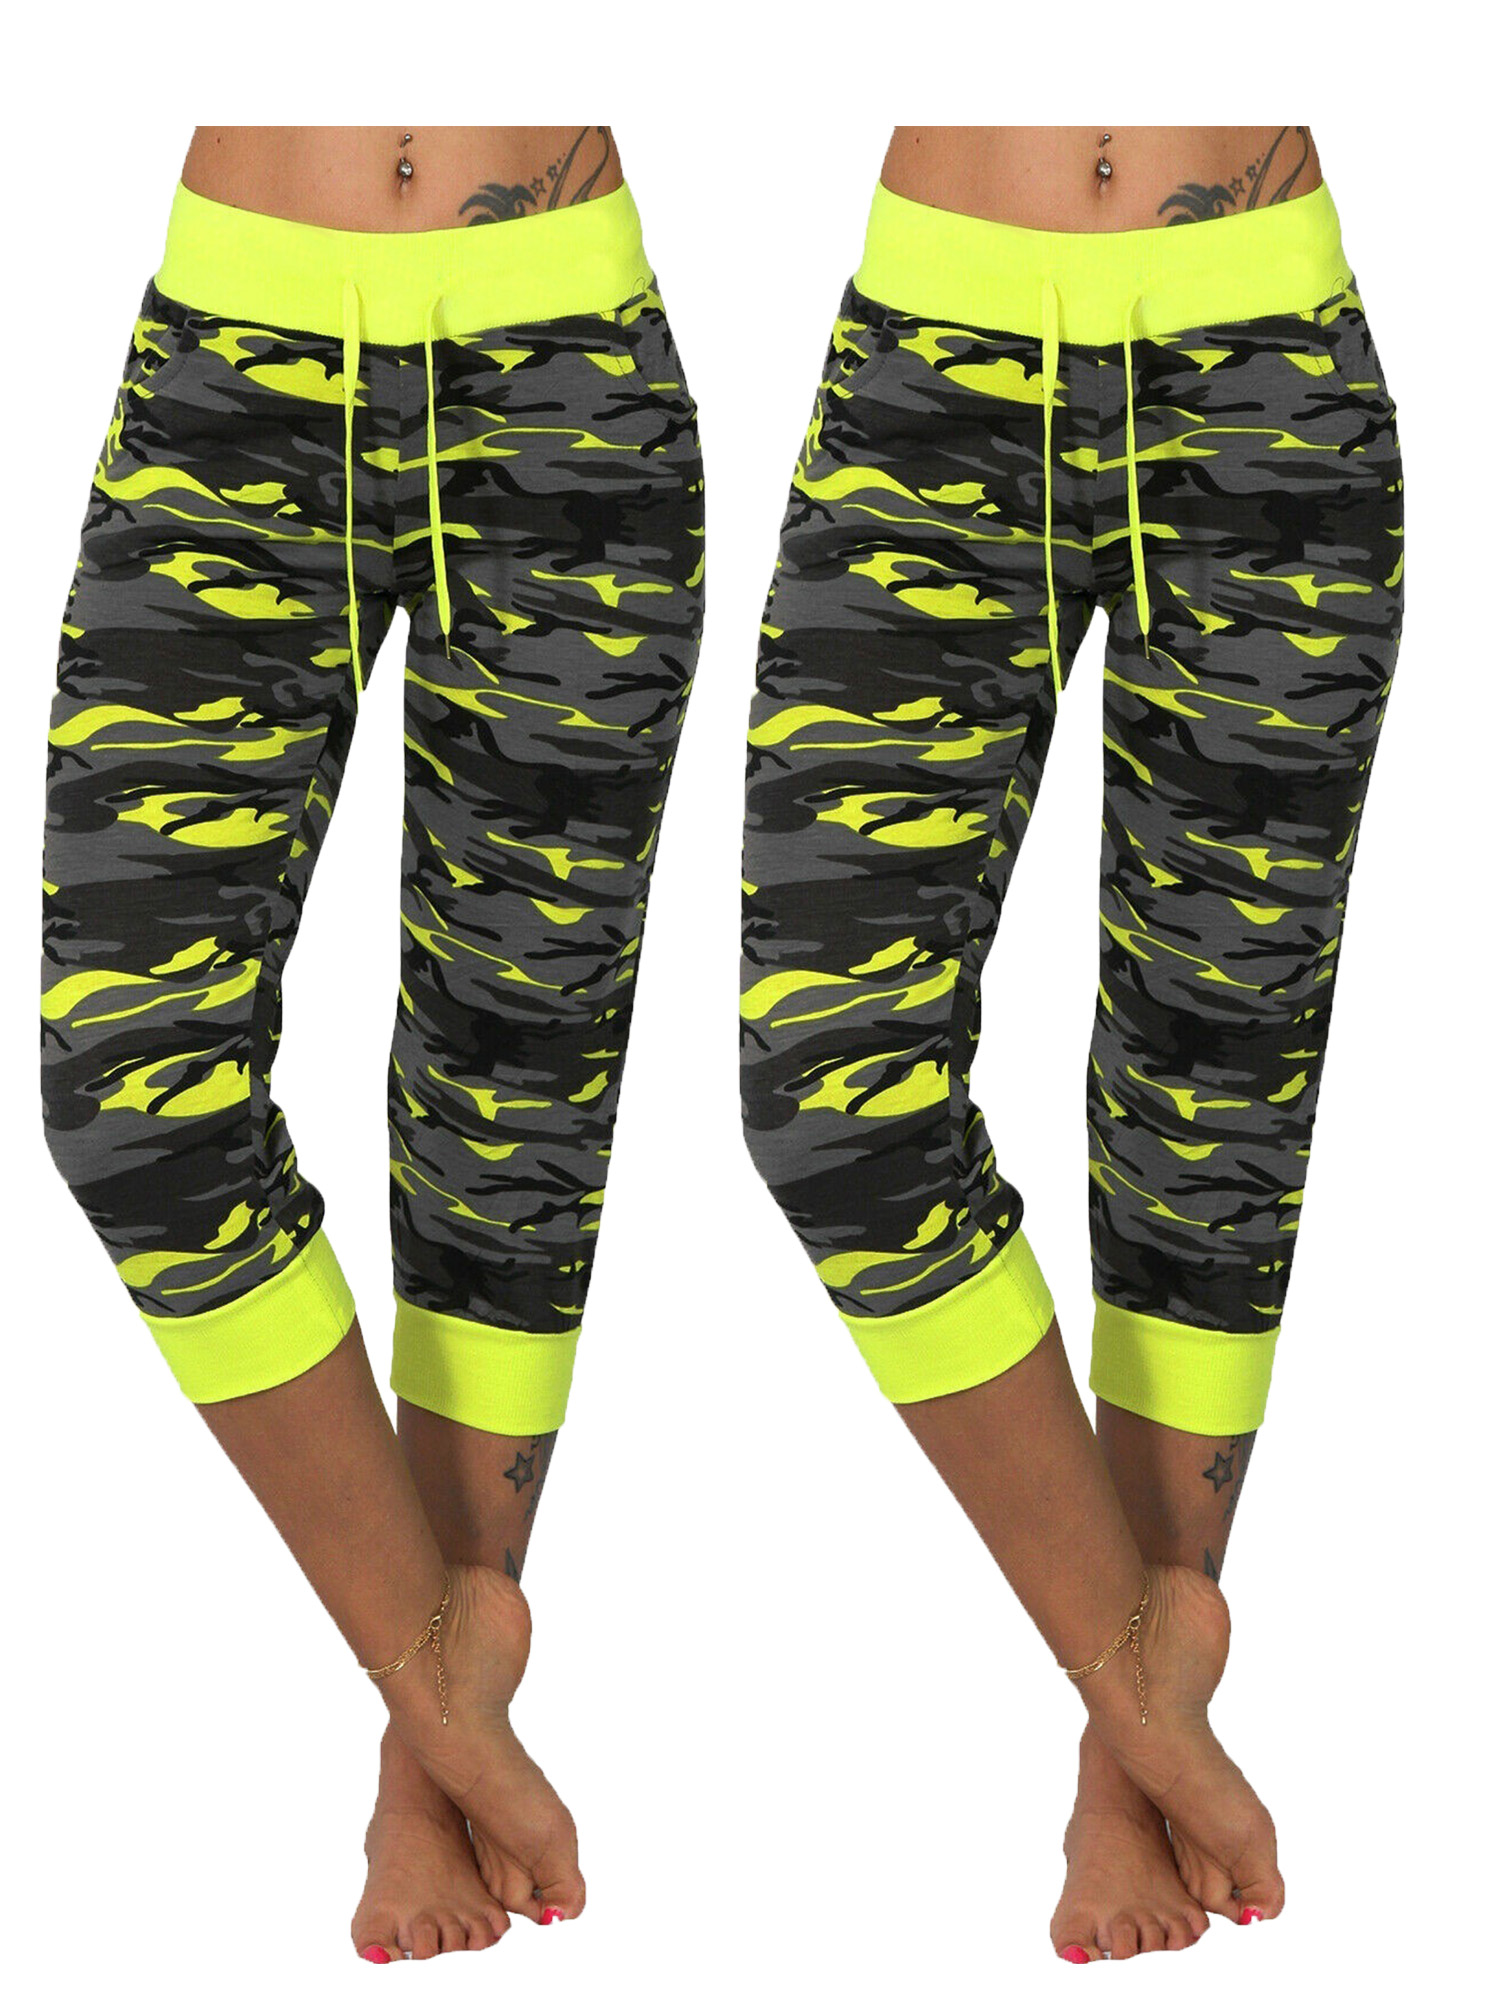 (2 Packs) Juniors' Plus Size Camo Sports Yoga Crop Jeggings High Waist Tummy Control Oversized Camouflage Pants - image 1 of 3